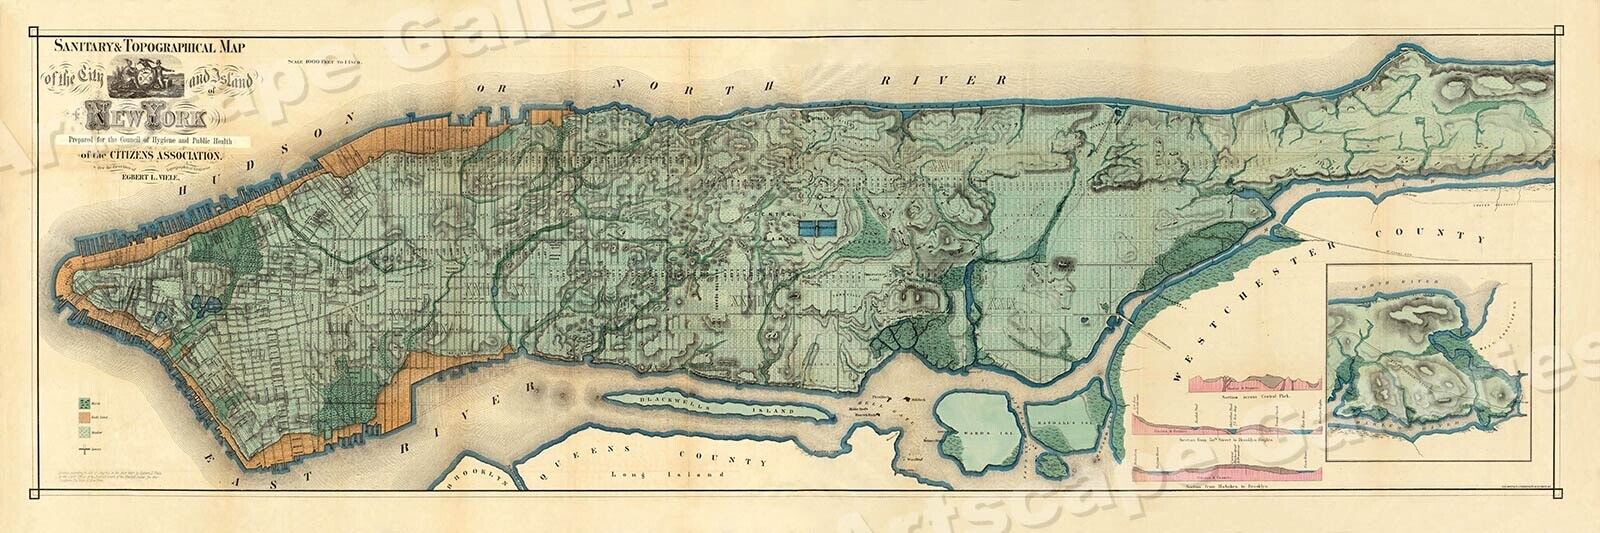 1865 Topographical Map of Manhattan NYC Historic Map - 12x36